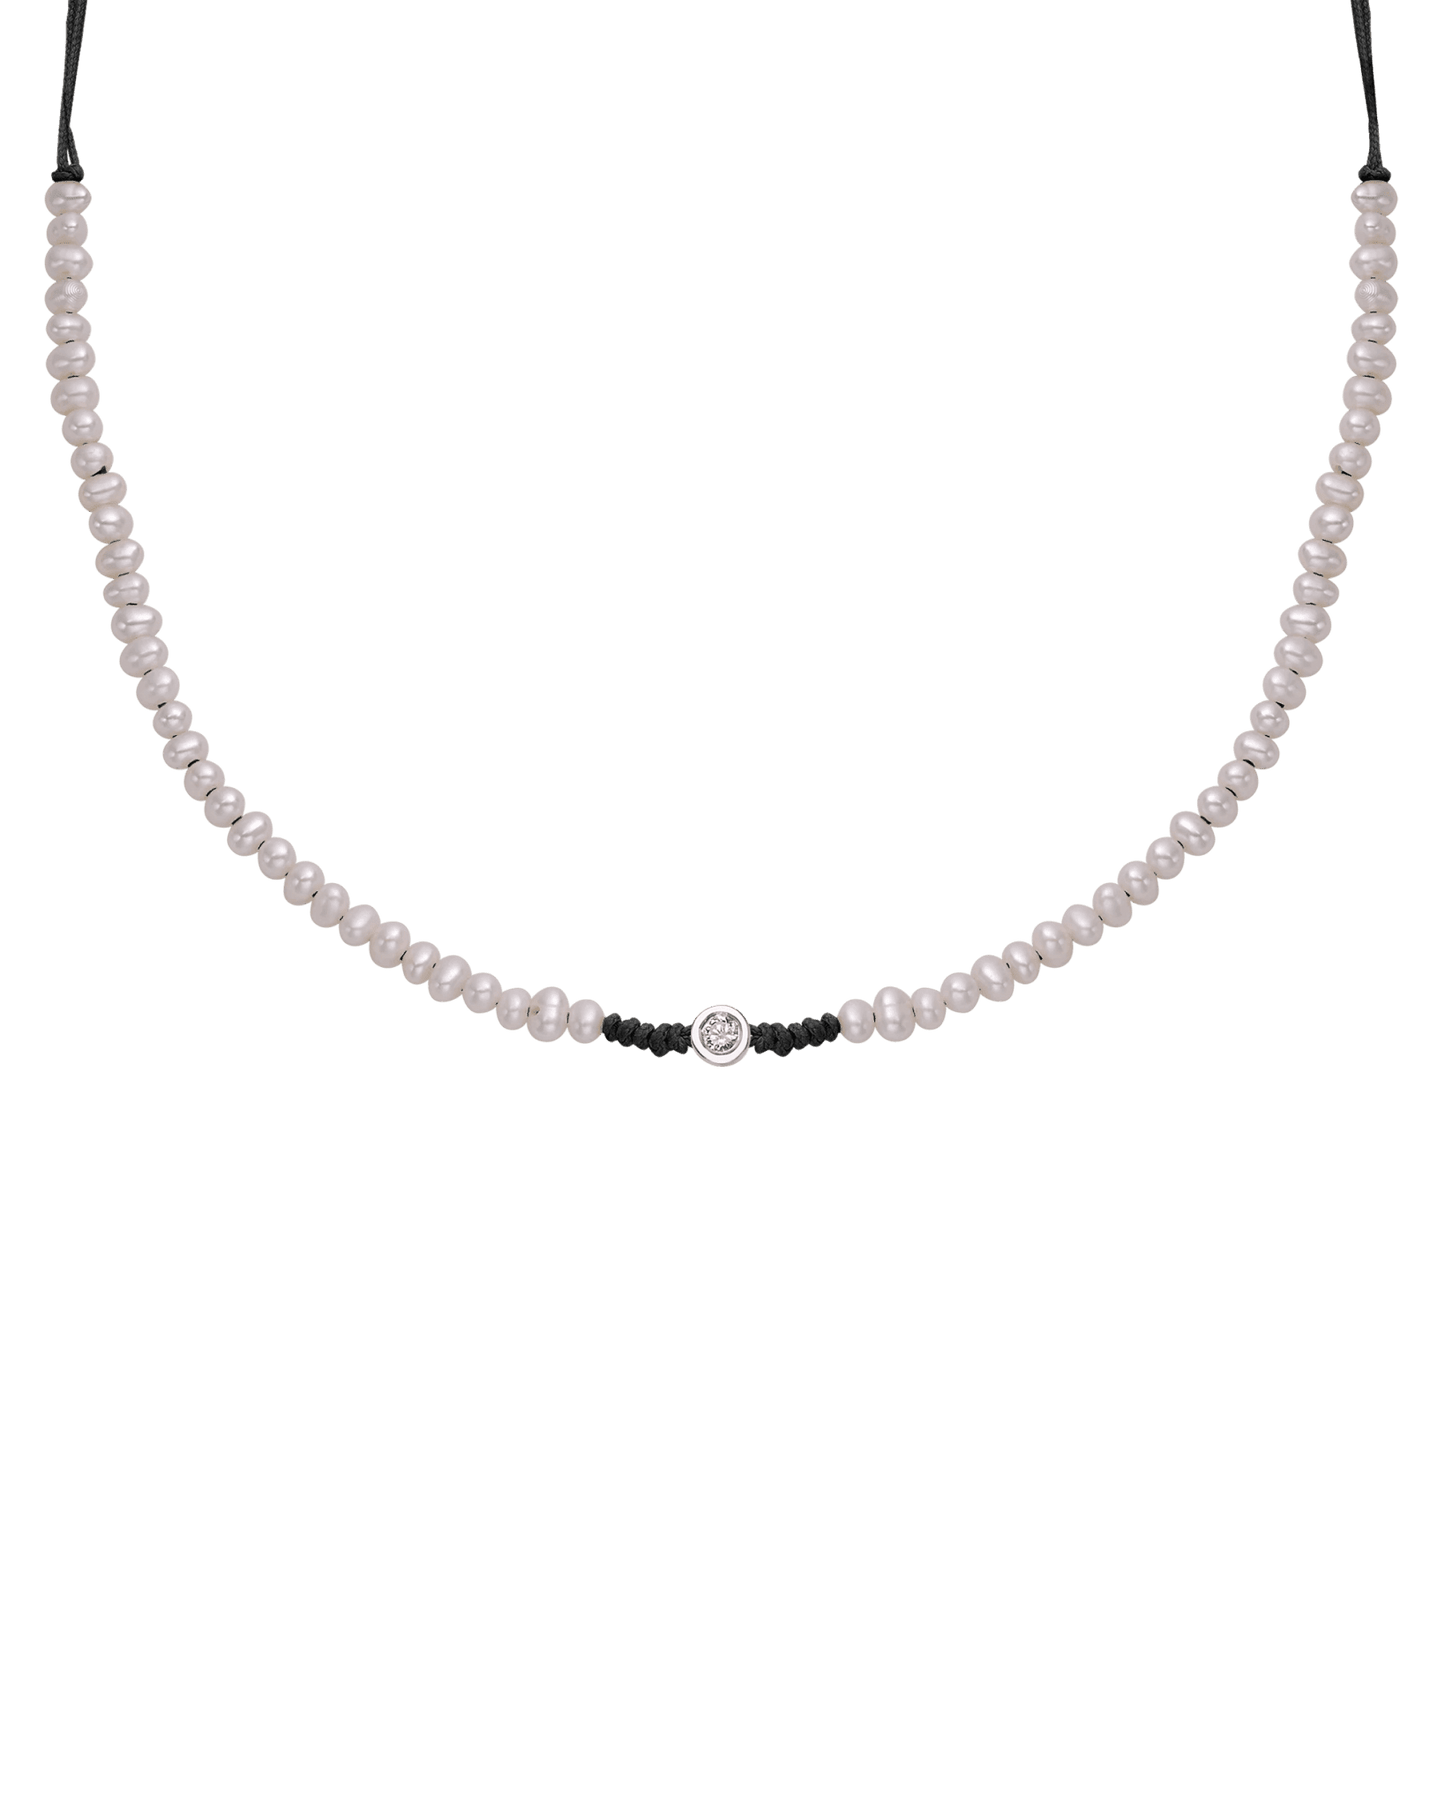 Collier String of Love Perles Naturelles - Or Blanc 14 carats Necklaces 14K Solid Gold Noir Medium: 0.05 carats 